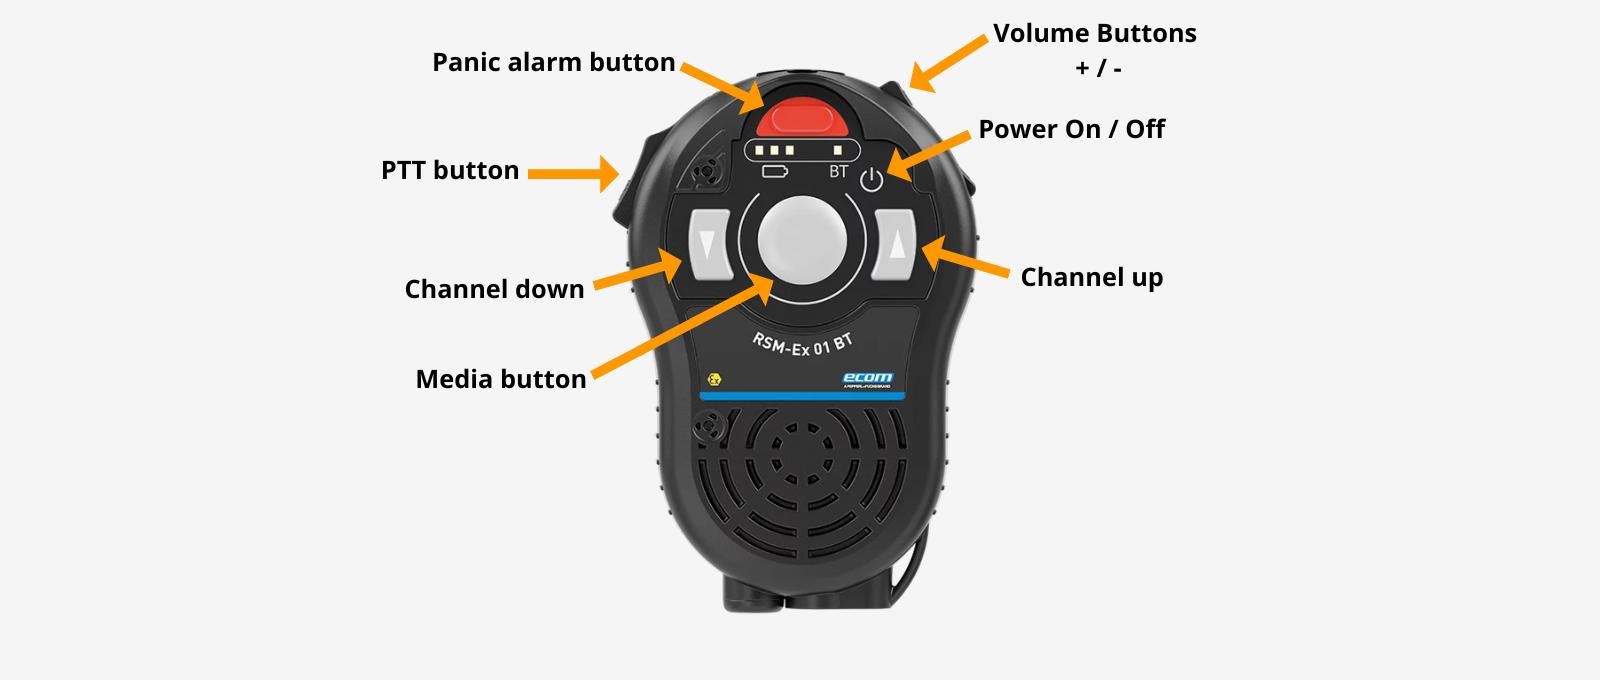 ATEX RSM Remote Speaker Microphone with functions such as panic alarm / personal alarm ptt button